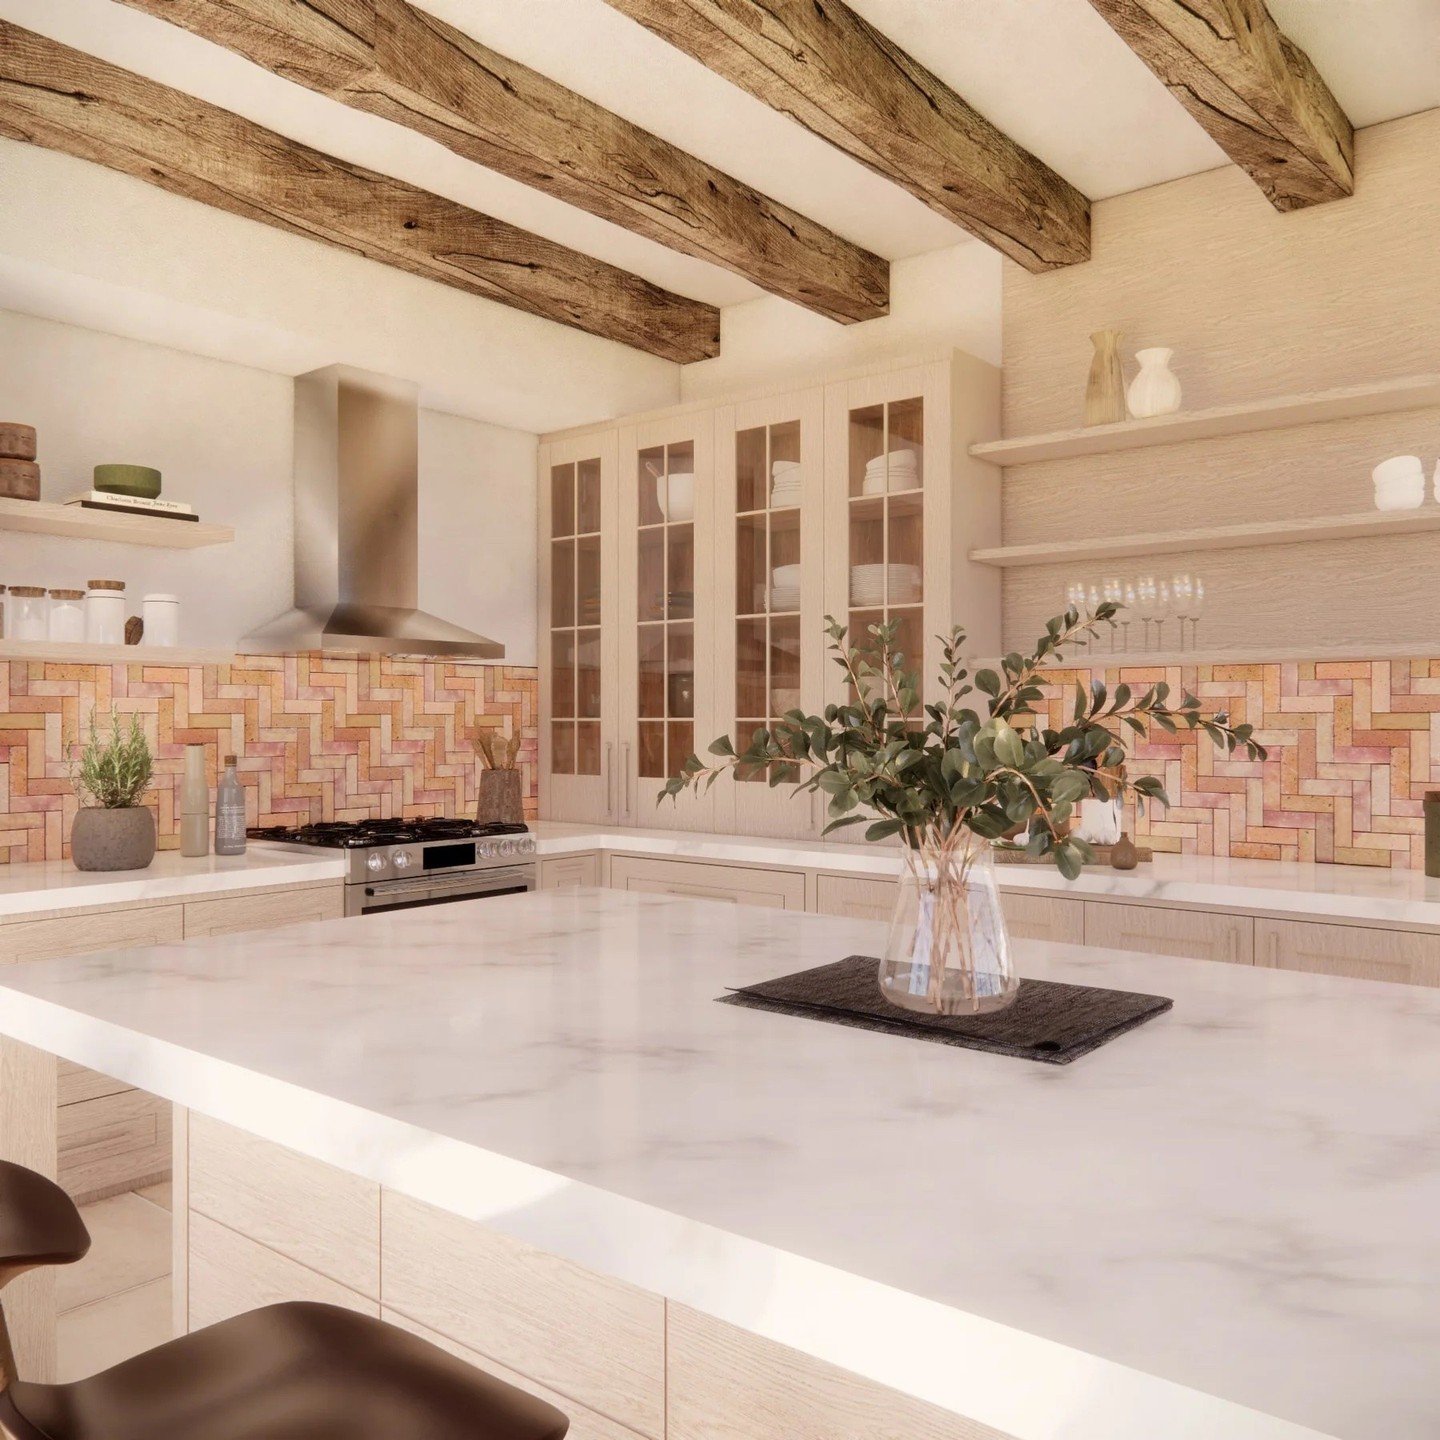 Add a touch of organic luxury to your kitchen with a Terracotta backsplash. A great way to achieve a coveted, rustic yet modern feel.⁠
⁠
Each tile is handcrafted clay that adds charm to any space.⁠
⁠
Available in three color variations - White Clay, 